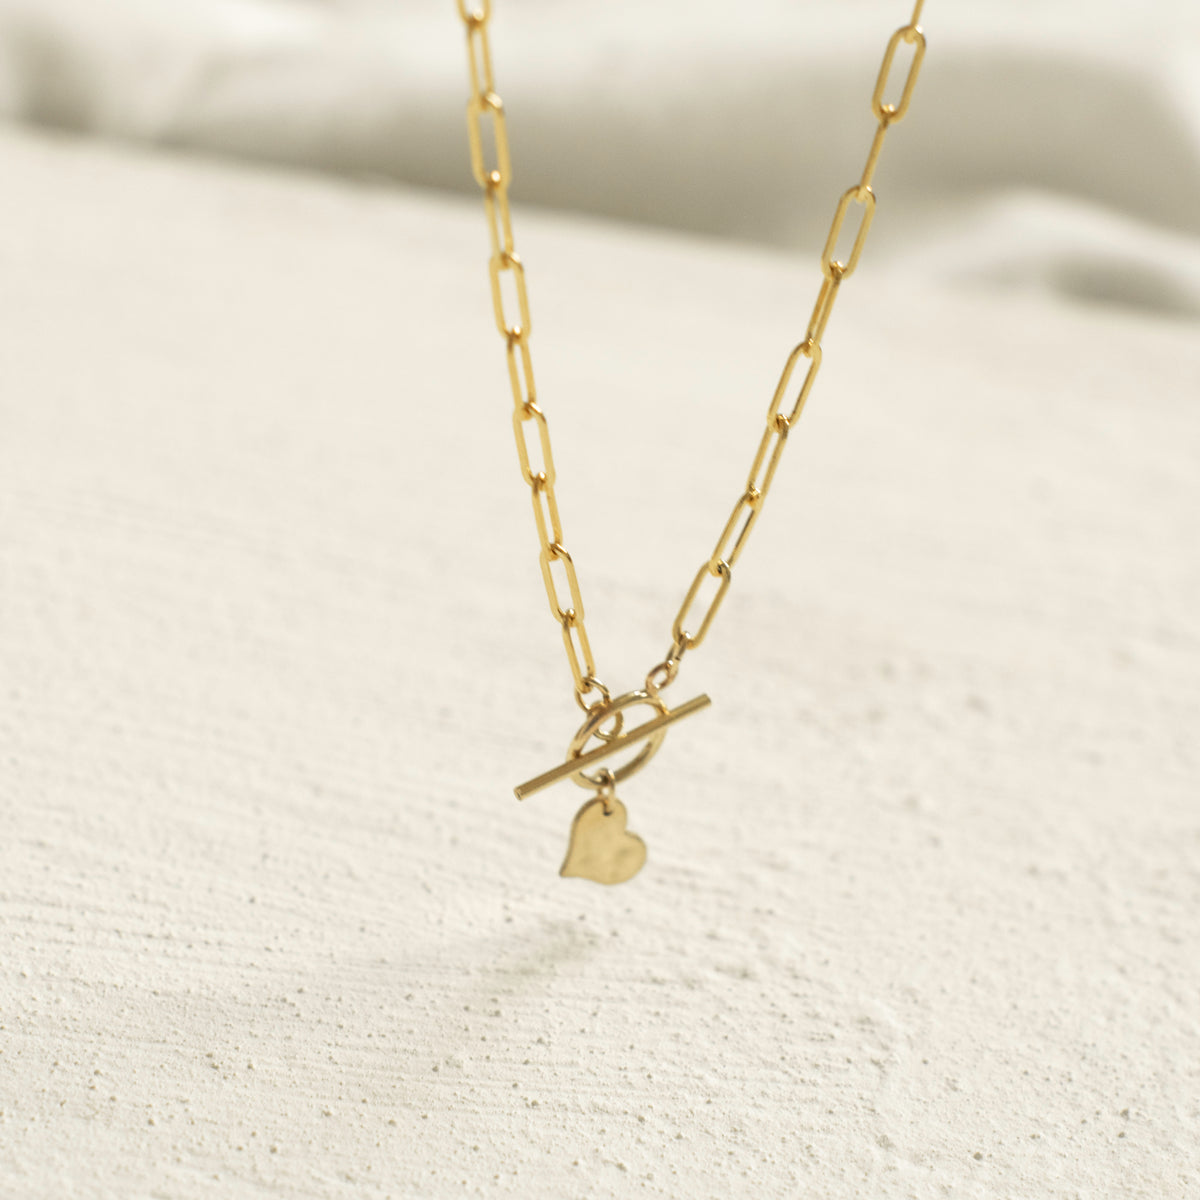 14K Gold Filled Tiny Heart Charm on a Bold Paper Clip Necklace with Toggle Closure